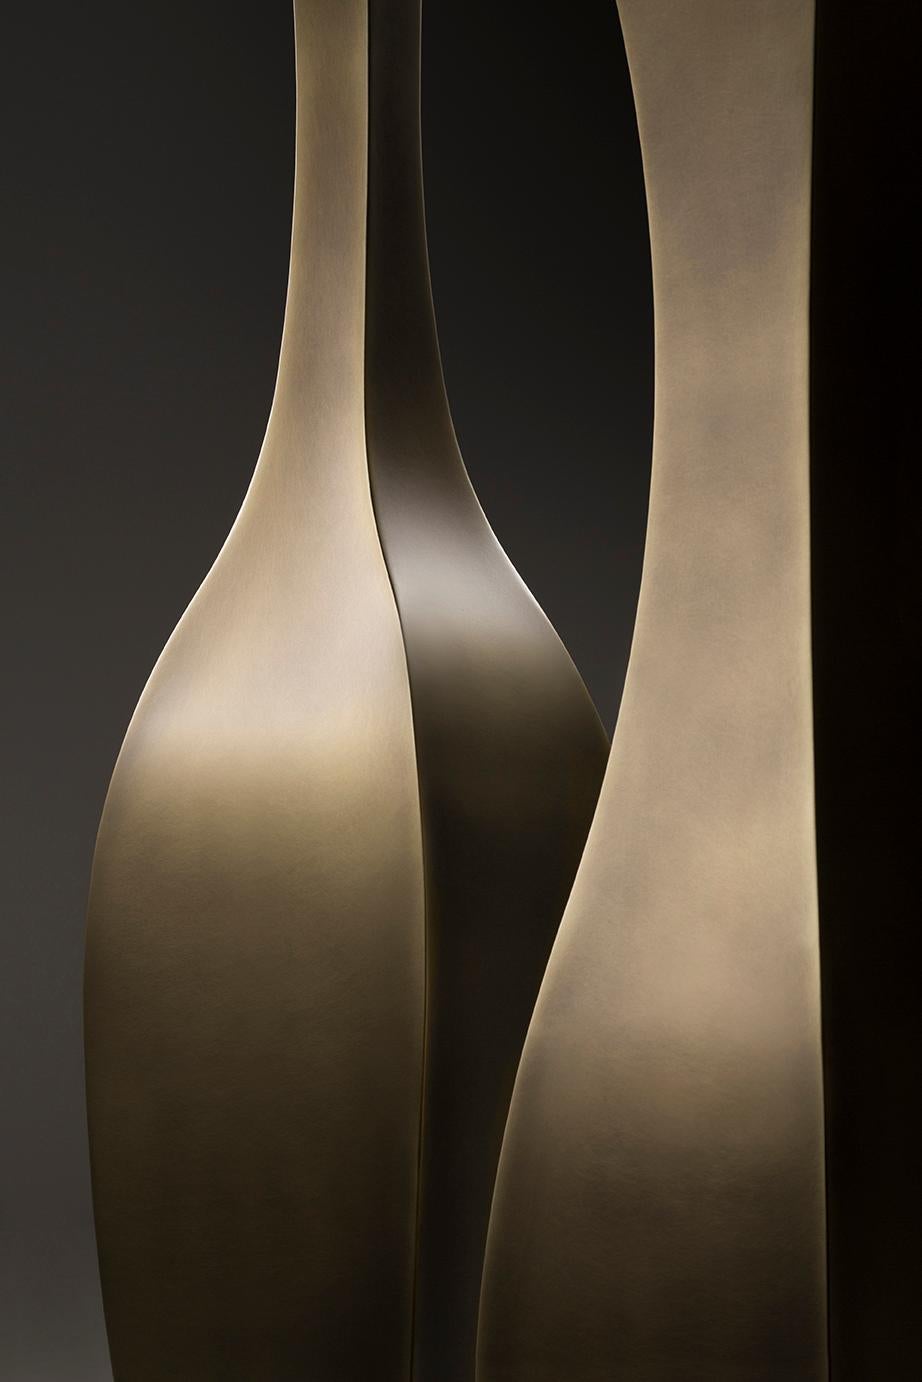 Italian DeCastelli Rocco 175 Vase in Stainless Steel by Stefano Dussin For Sale